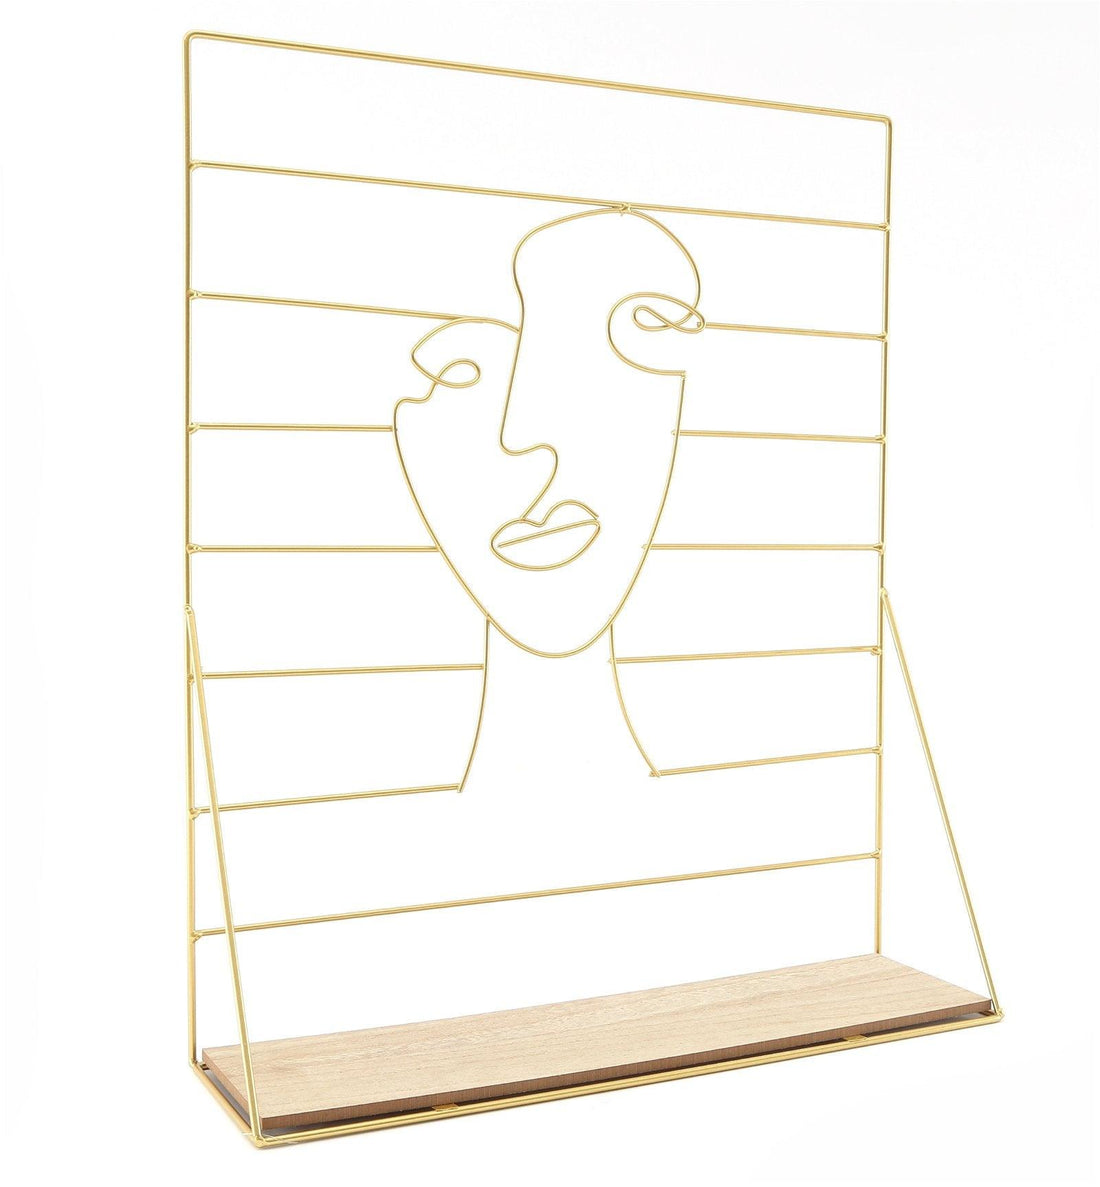 Gold Wire Face Jewellery Hanger - £26.99 - Freestanding Shelving 